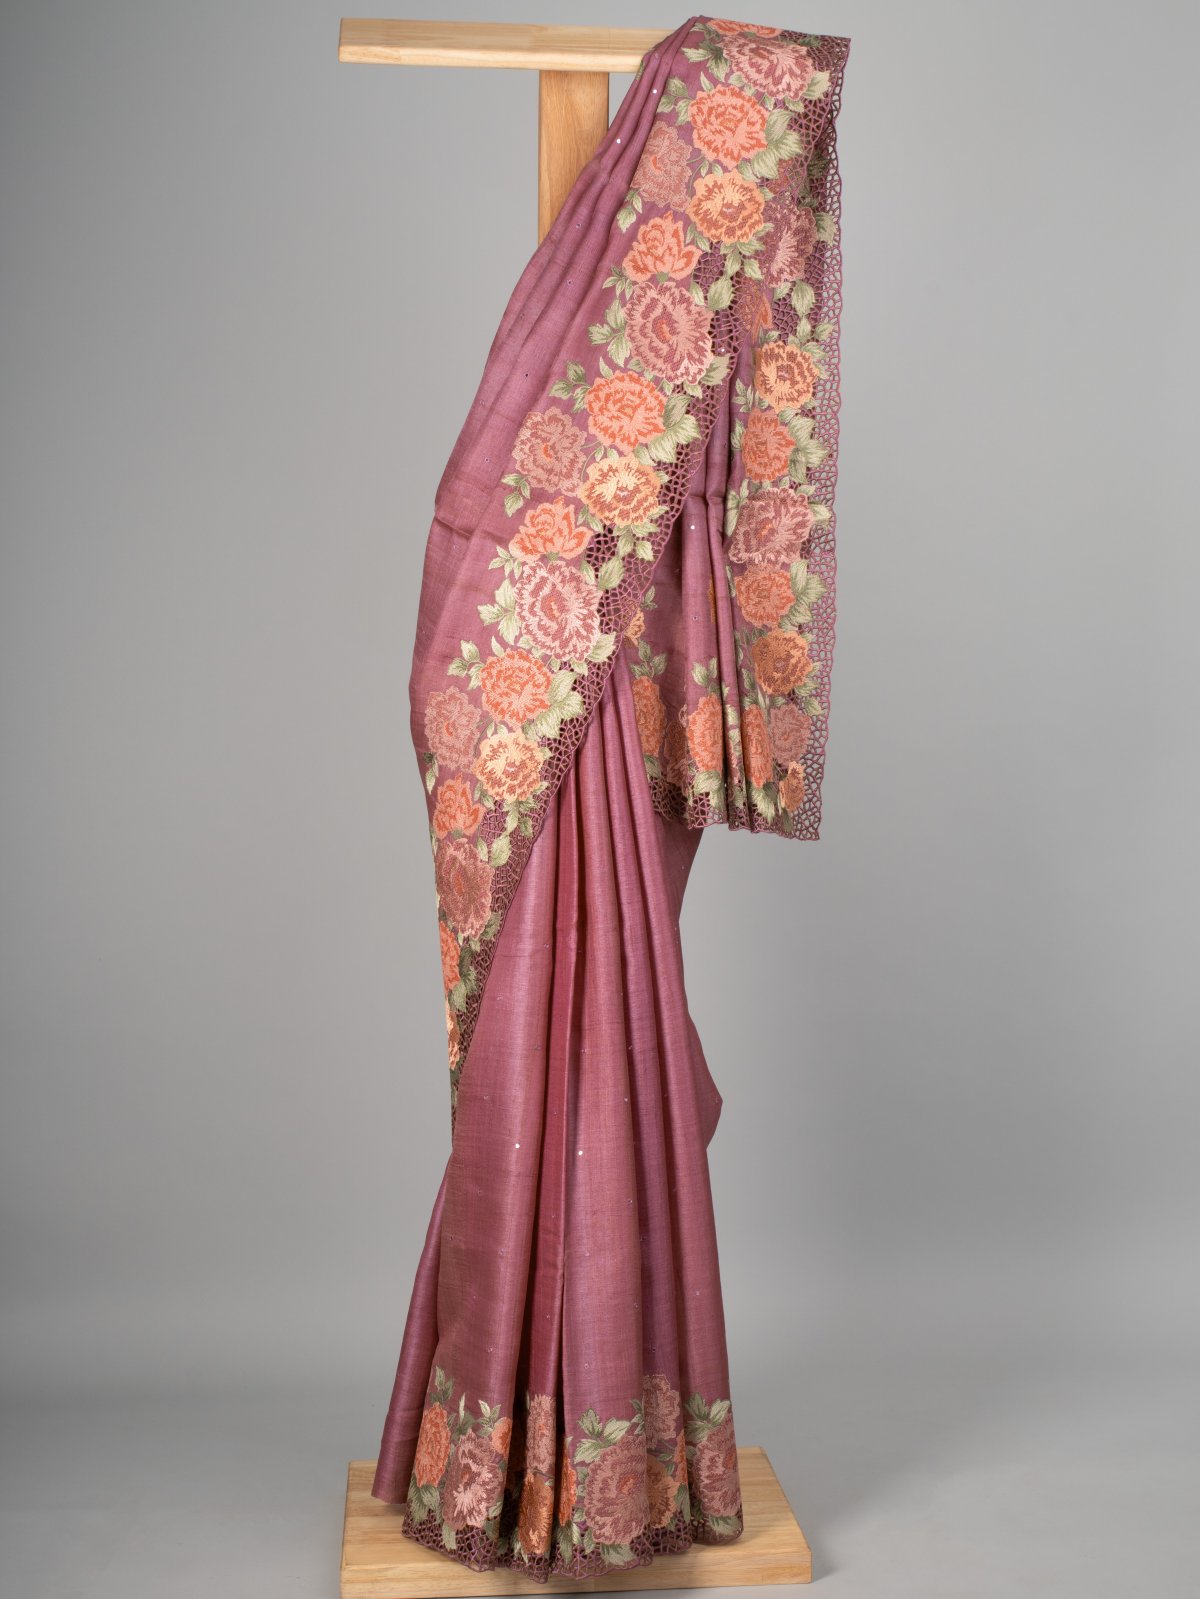 Medium Cranberry Tussar Silk Saree with Floral Embroidery Border